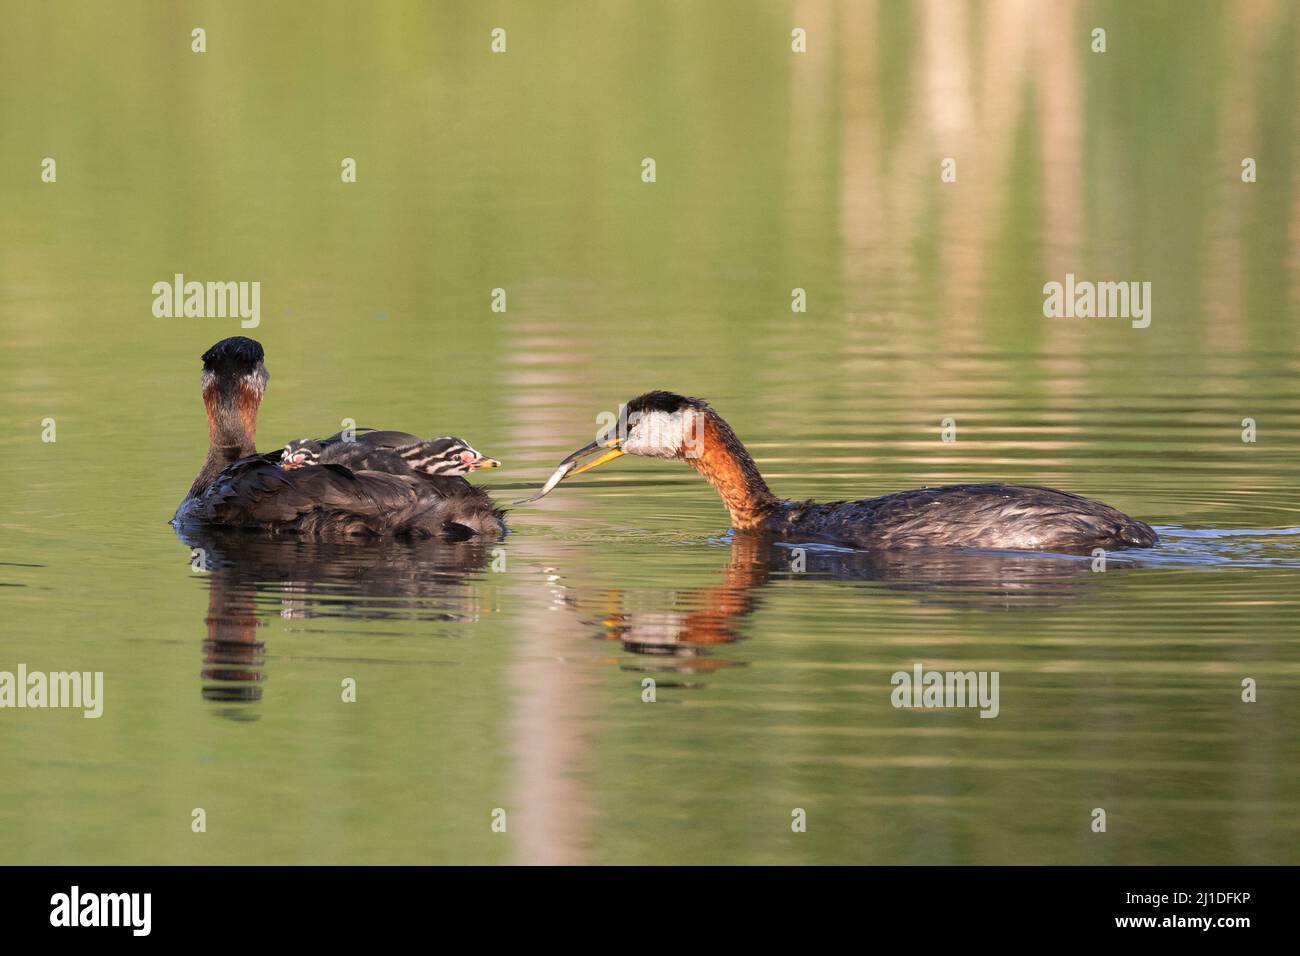 Red-necked Grebe parent bird carrying a fish to feed young chick on stormwater pond in Fish Creek Provincial Park, Calgary, Canada. Podiceps grisegena Stock Photo